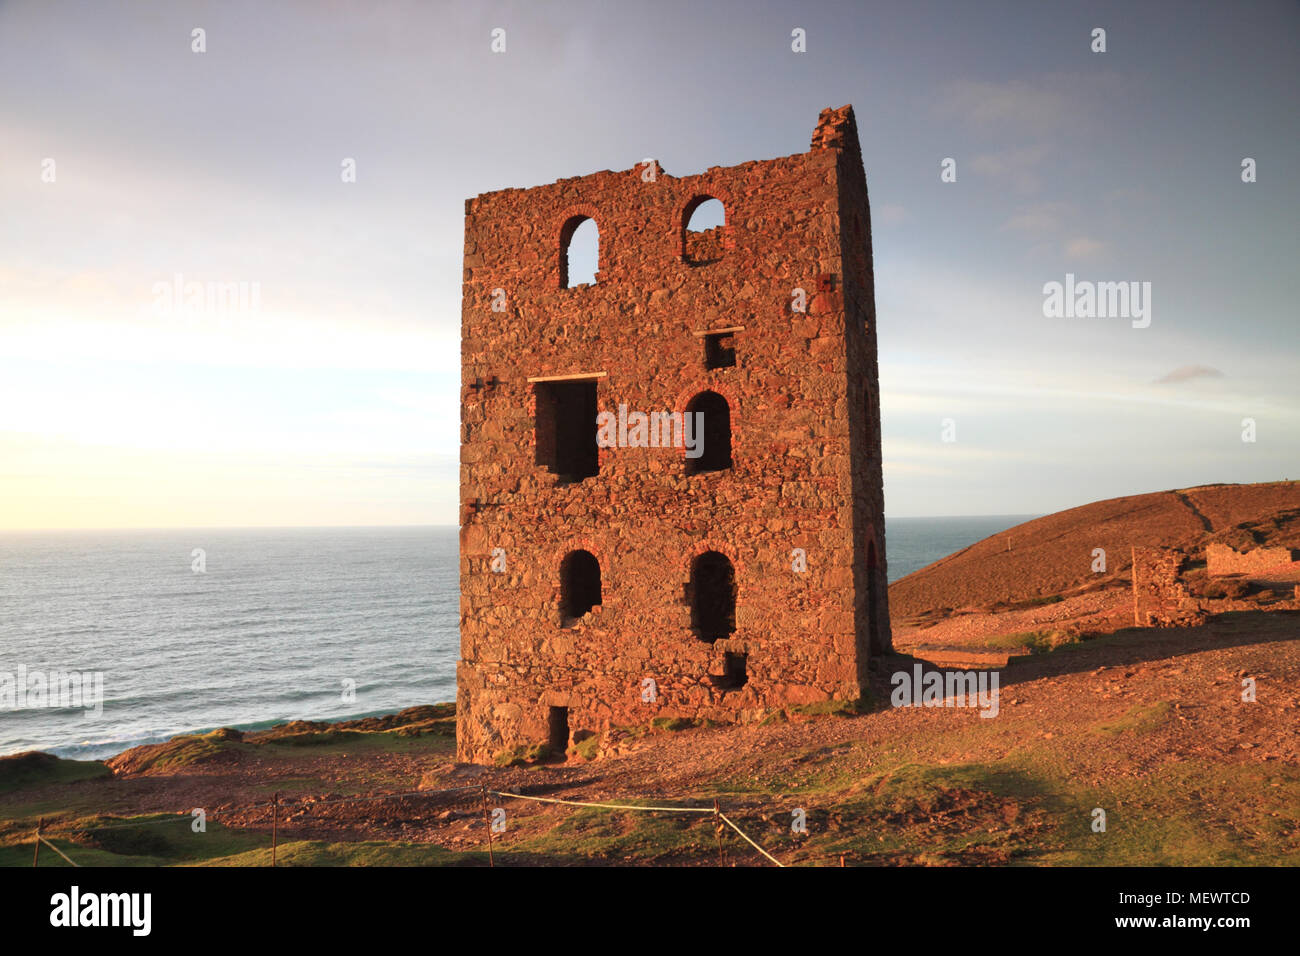 The ruins of the Towanroath engine house, St Agnes, Cornwall, are illuminated by the setting sun. Stock Photo